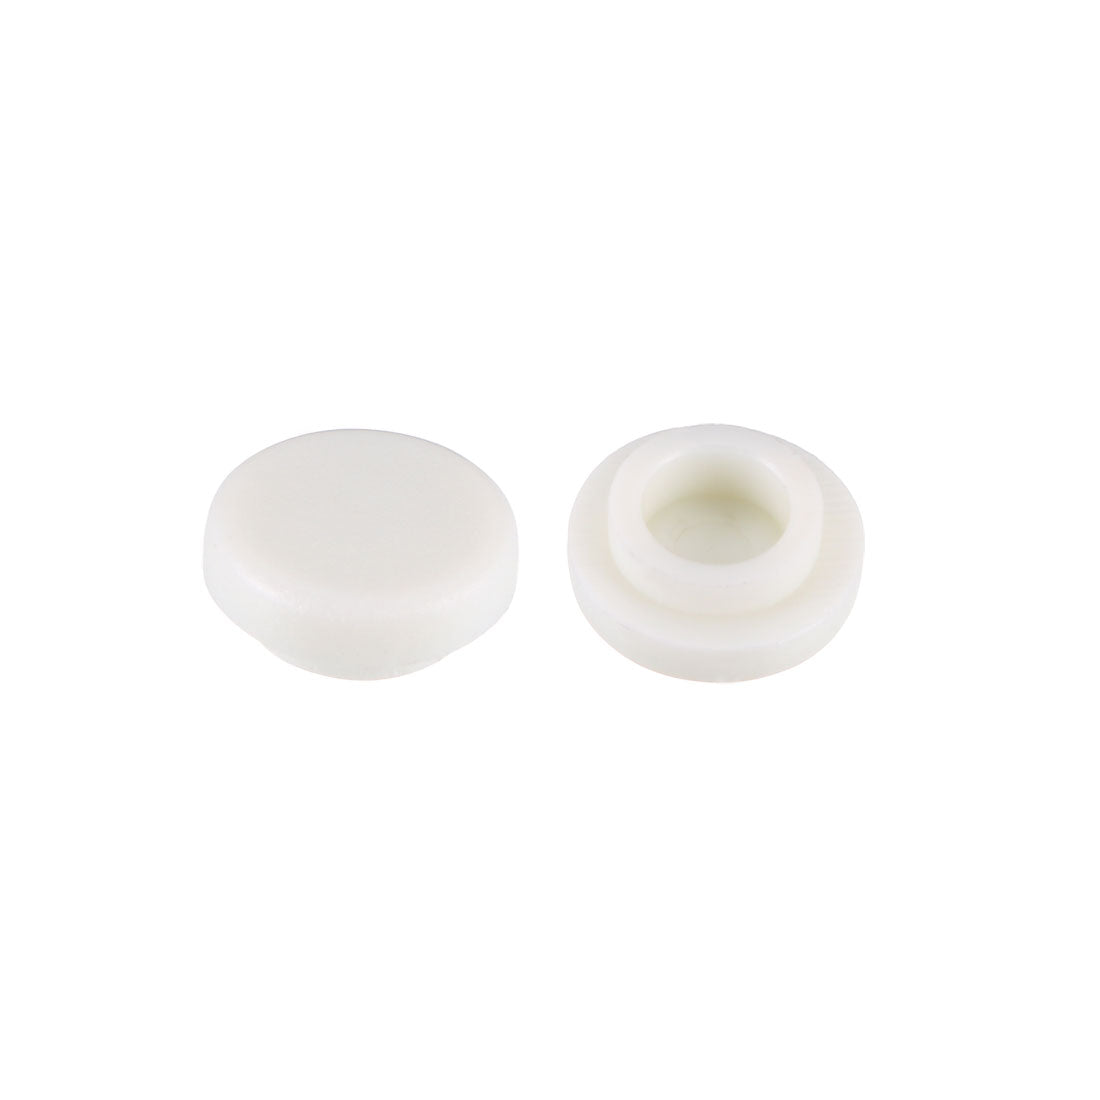 uxcell Uxcell 25Pcs 2.9mm Hole Dia Plastic Pushbutton Tactile Switch Caps Cover Keycaps Protector White for 6x6 Tact Switch